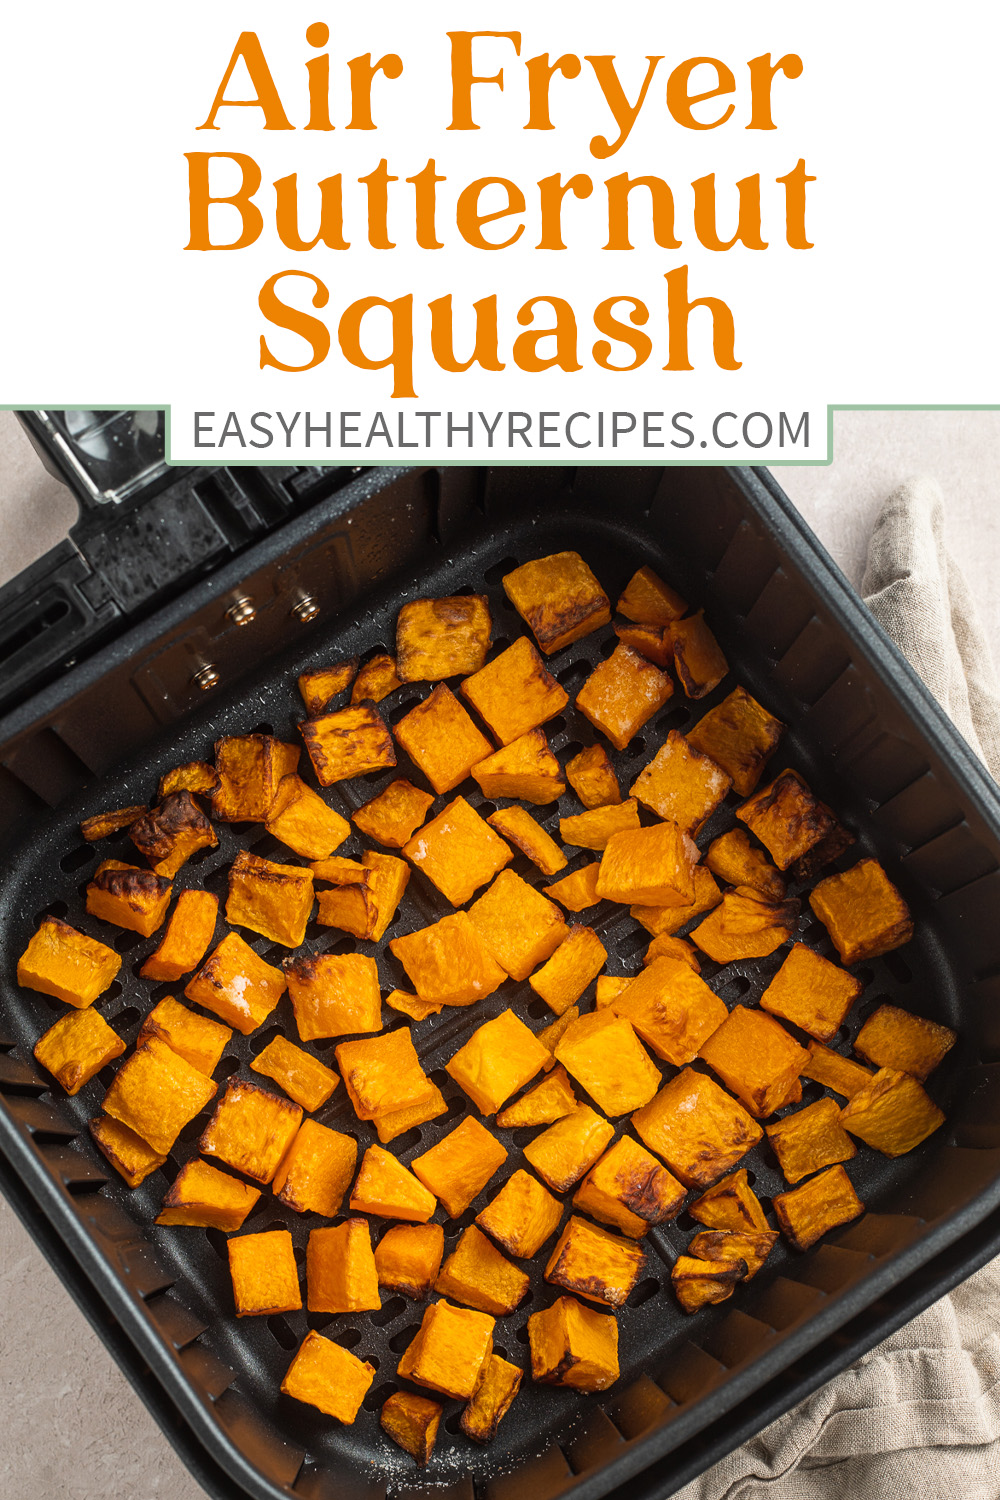 Pin graphic for air fryer butternut squash.